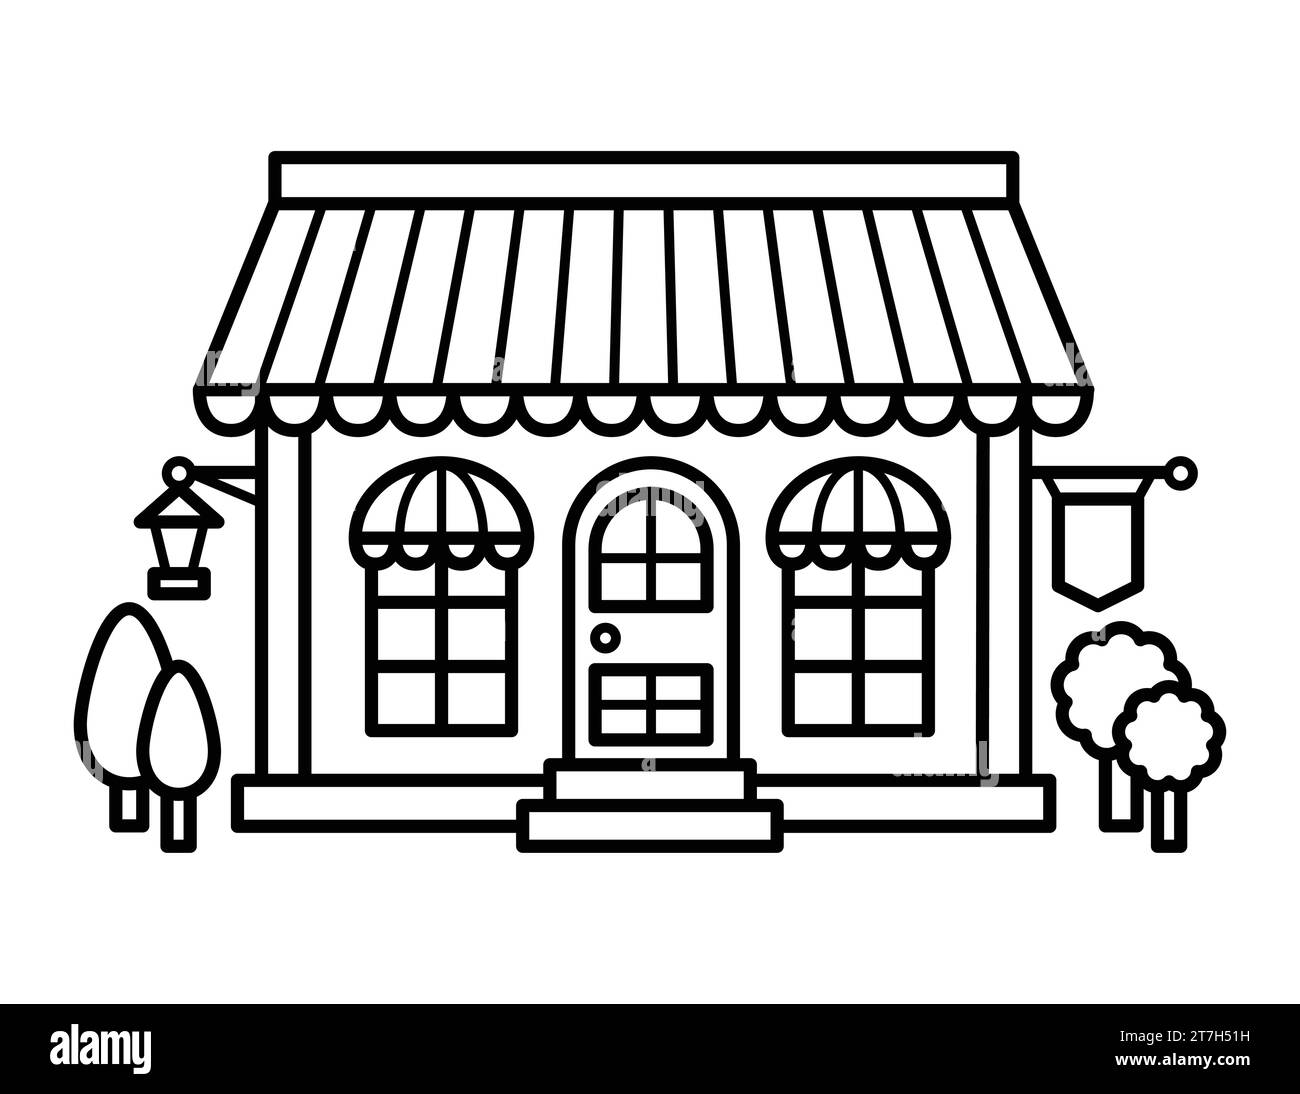 Cafe Restaurant Front Coloring Page For Children Stock Vector